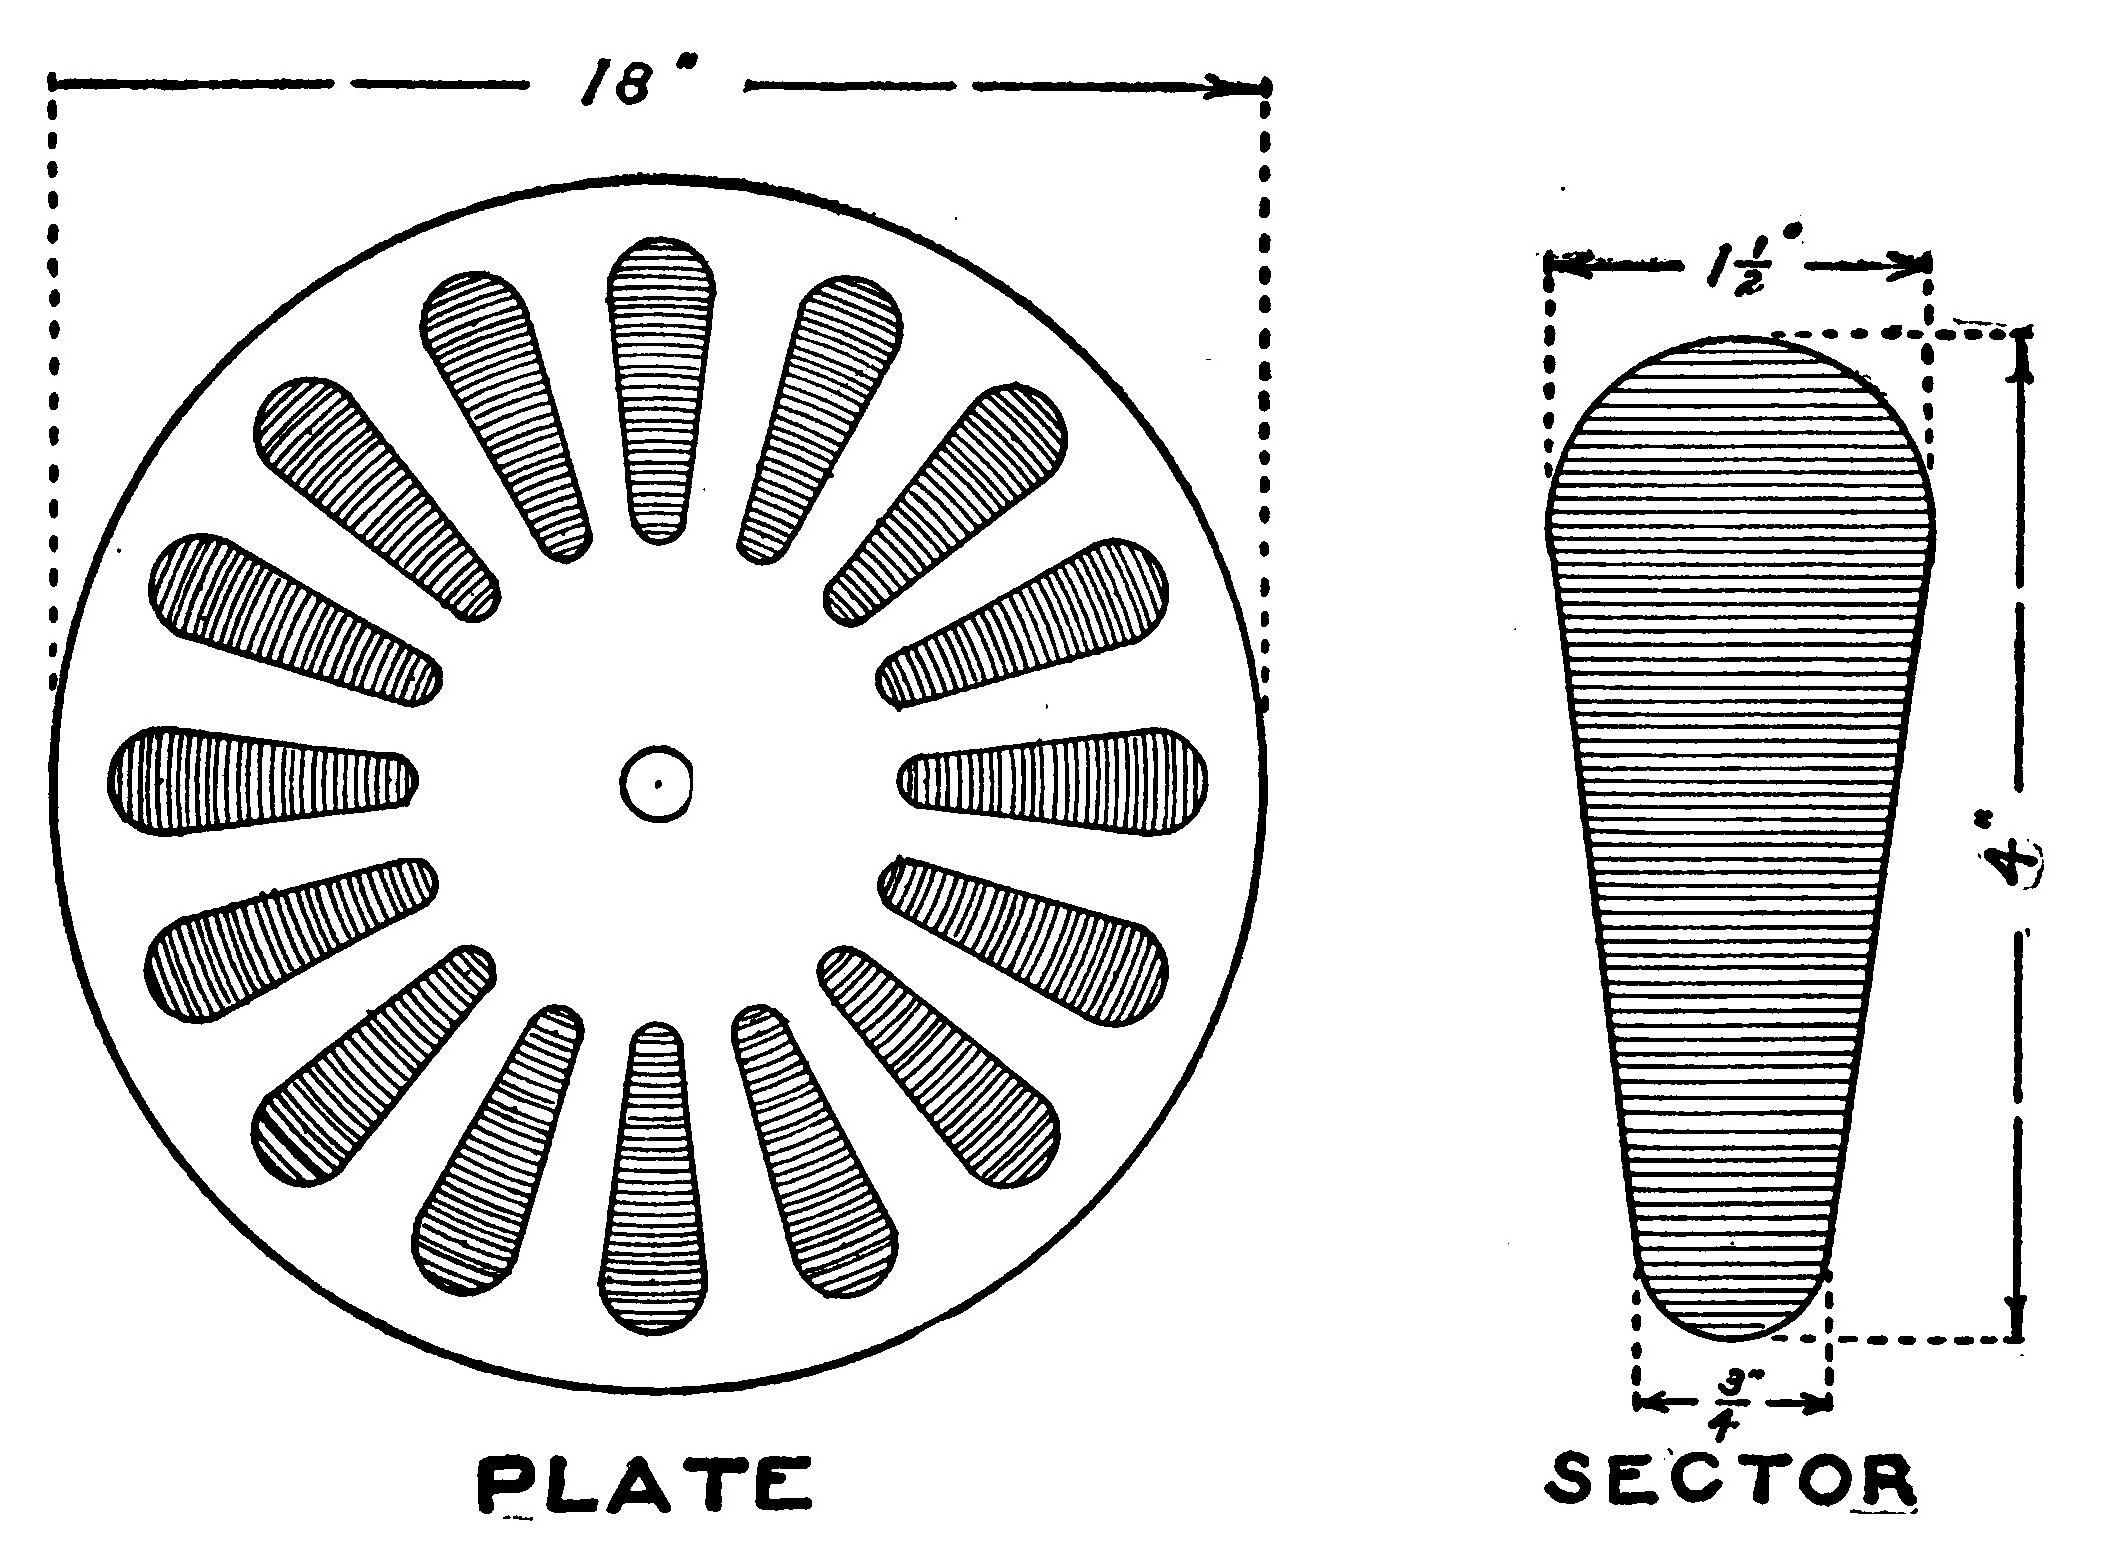 Fig. 35.—Plate with Sectors in Position, and a Pattern for the Sectors.